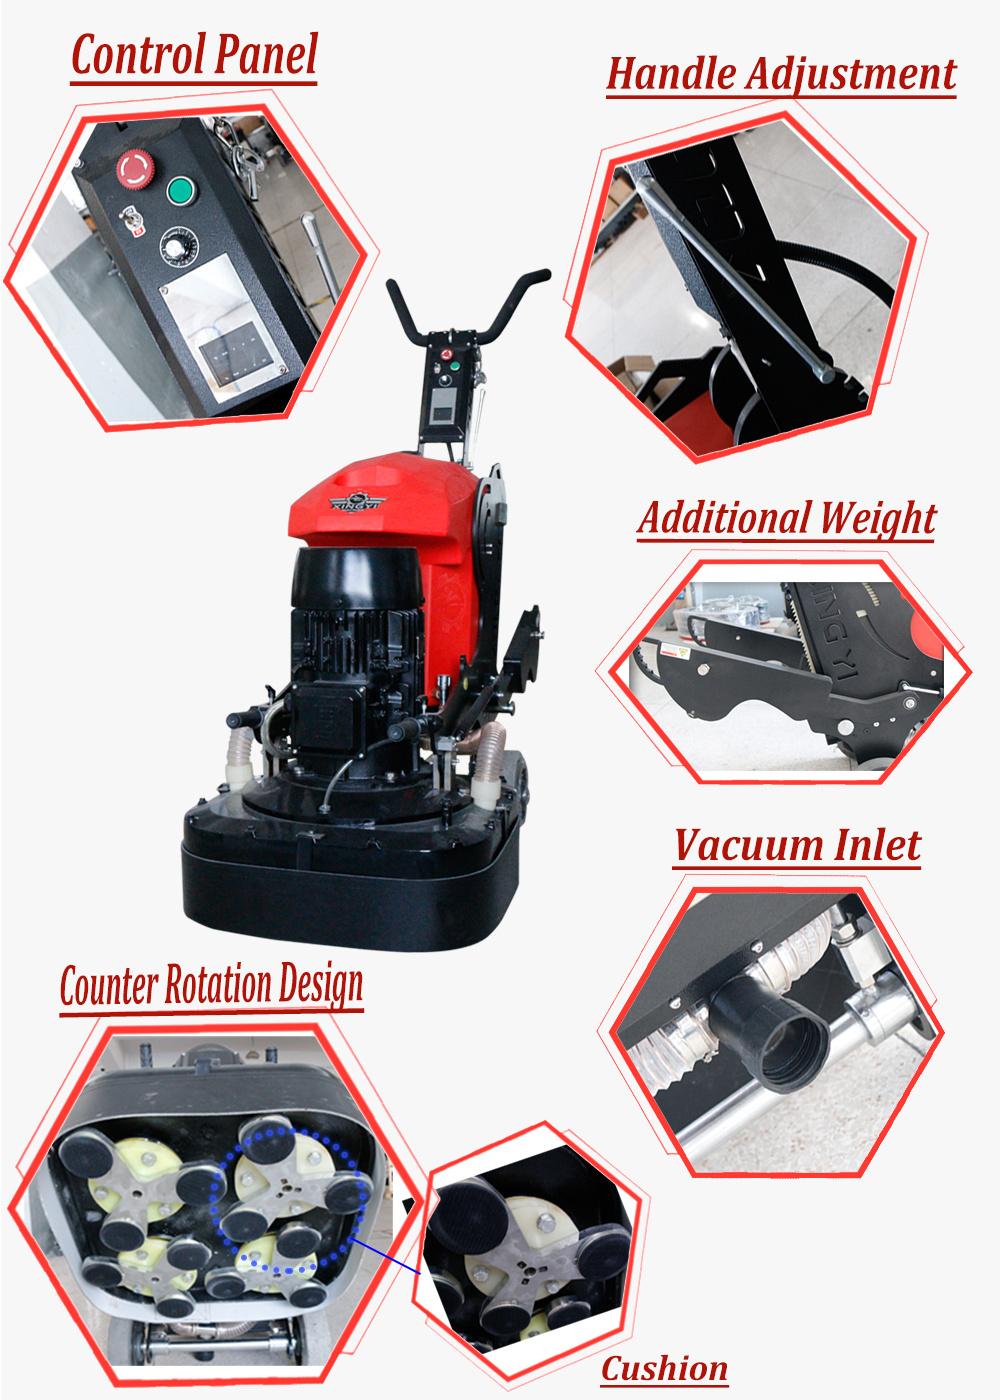 Three Phase Electric Planetary Concrete Floor Grinder for Sale